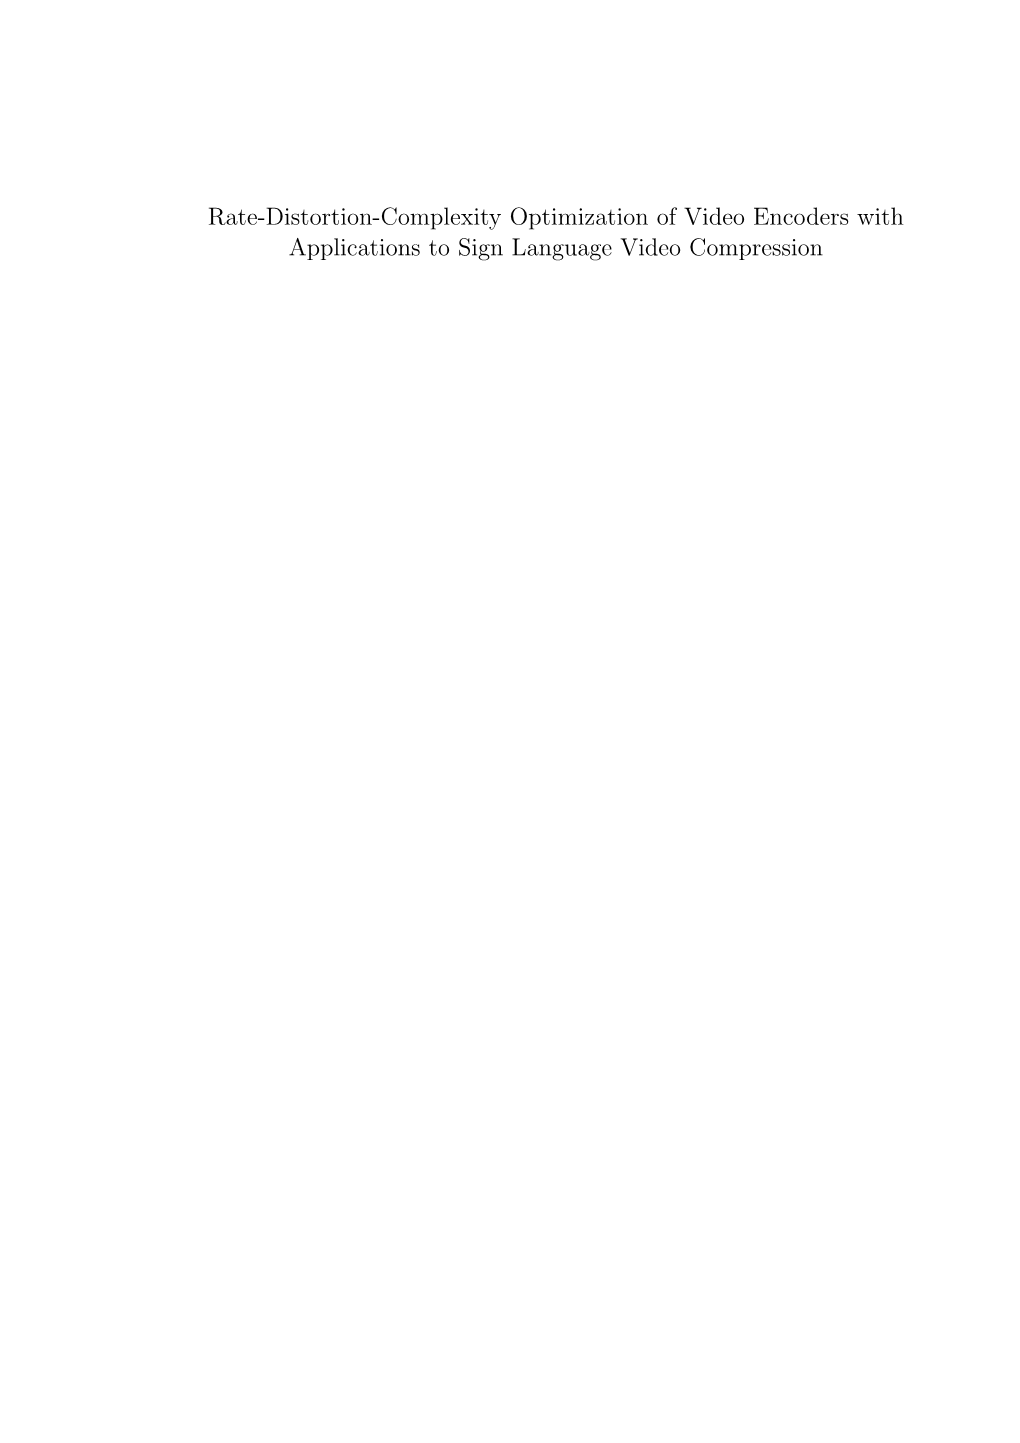 Rate-Distortion-Complexity Optimization of Video Encoders with Applications to Sign Language Video Compression